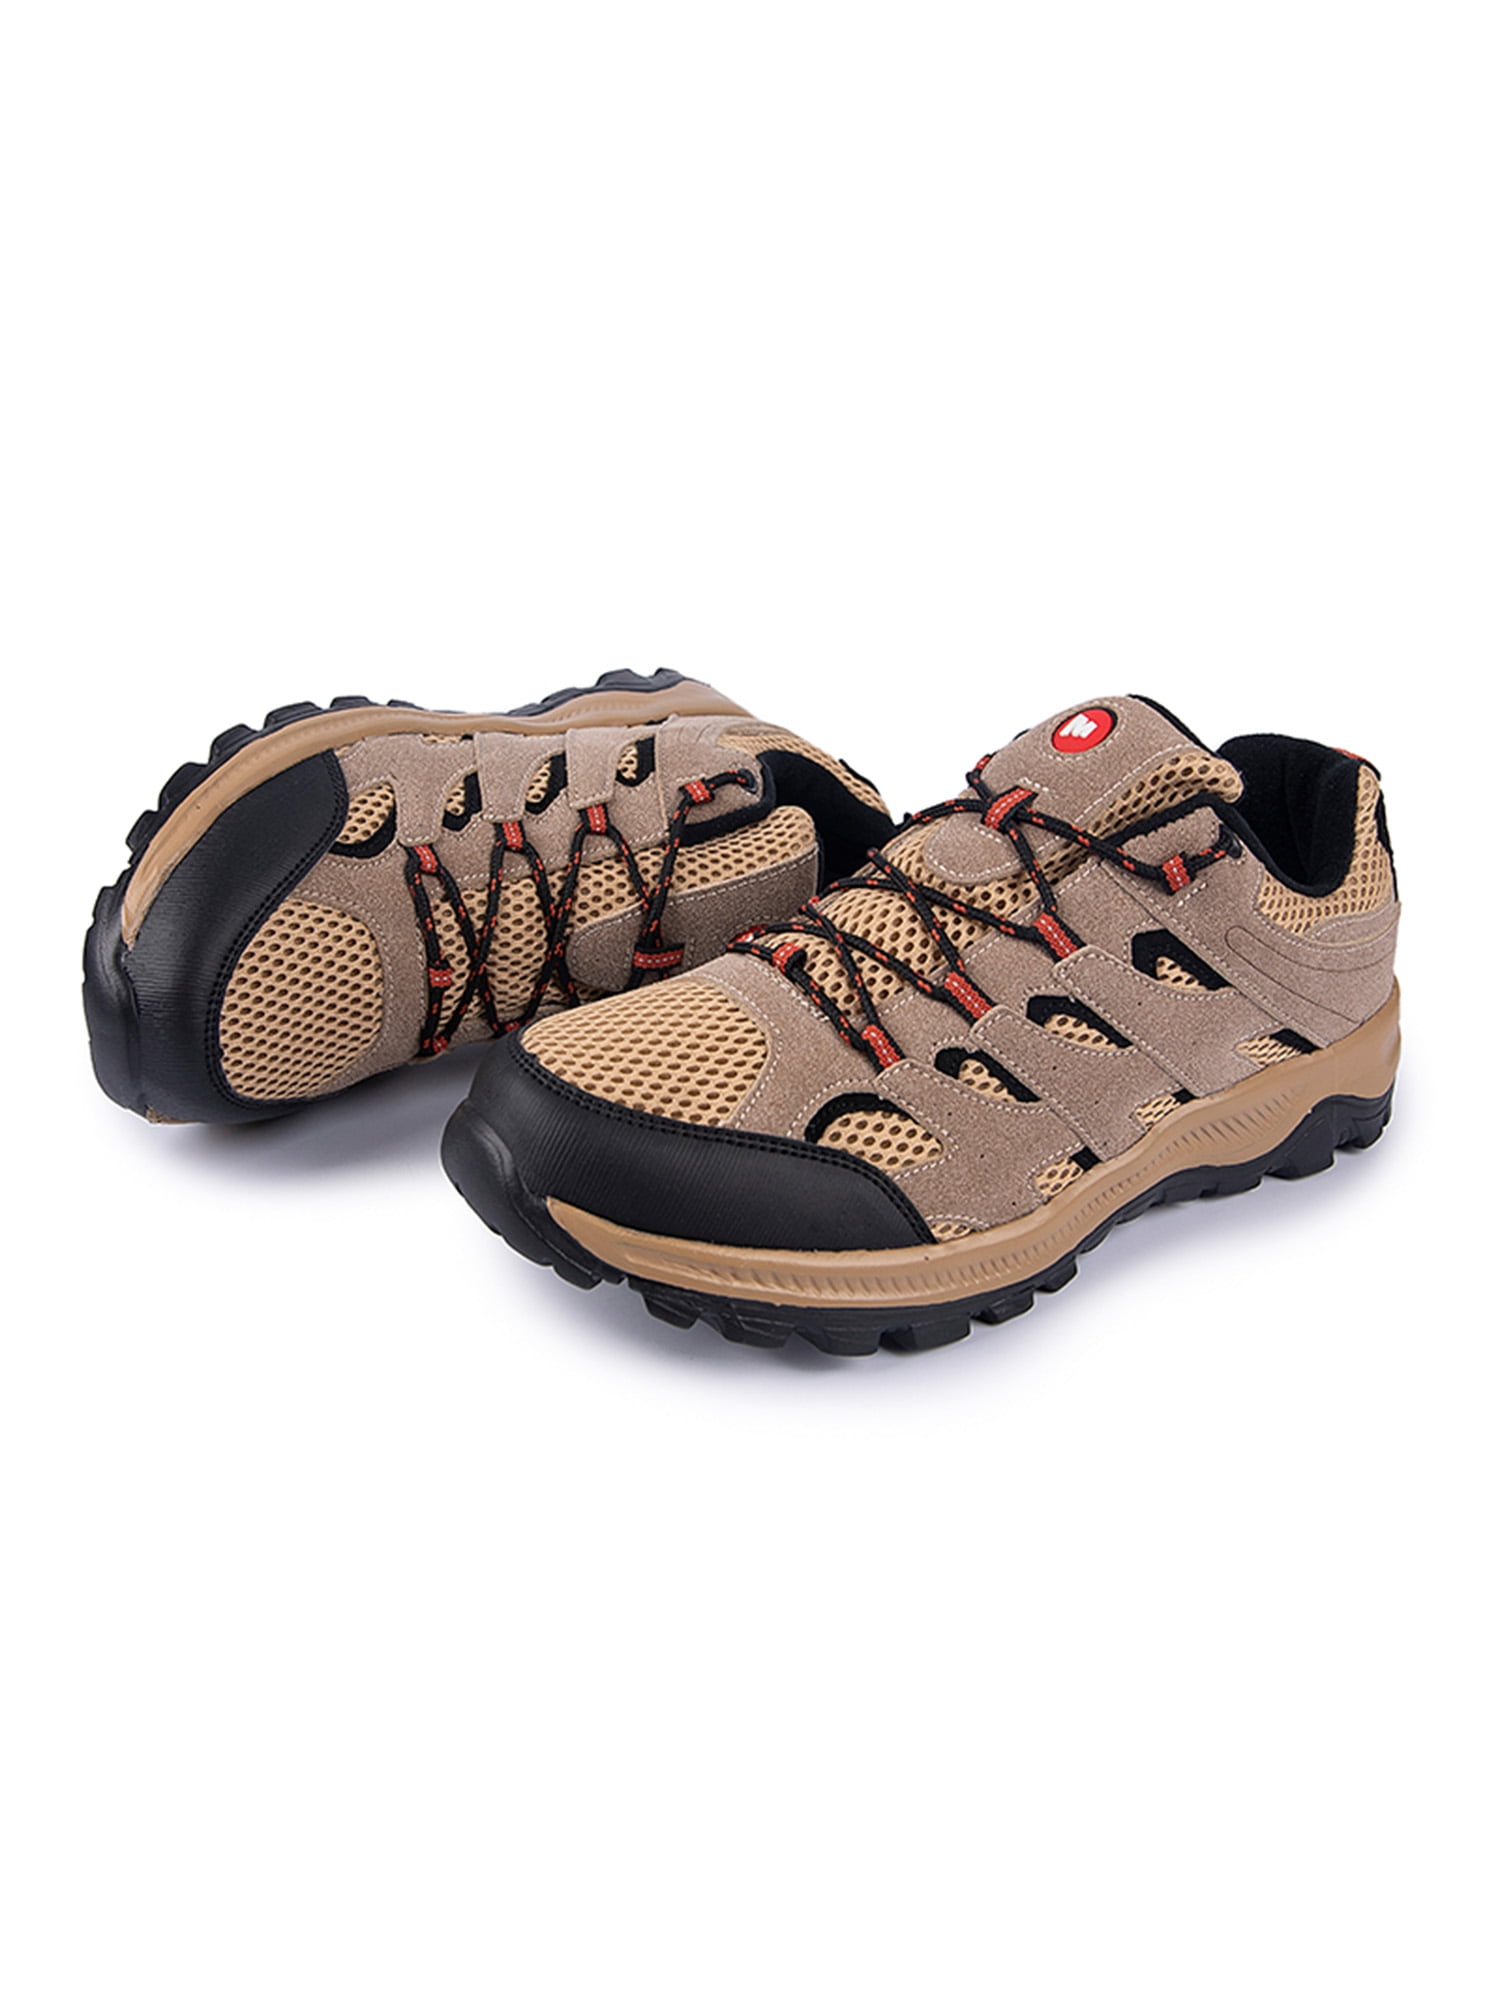 New Mens Hiking Shoes Outdoor Trail Trekking Sneakers Breathable Climbing Shoes 